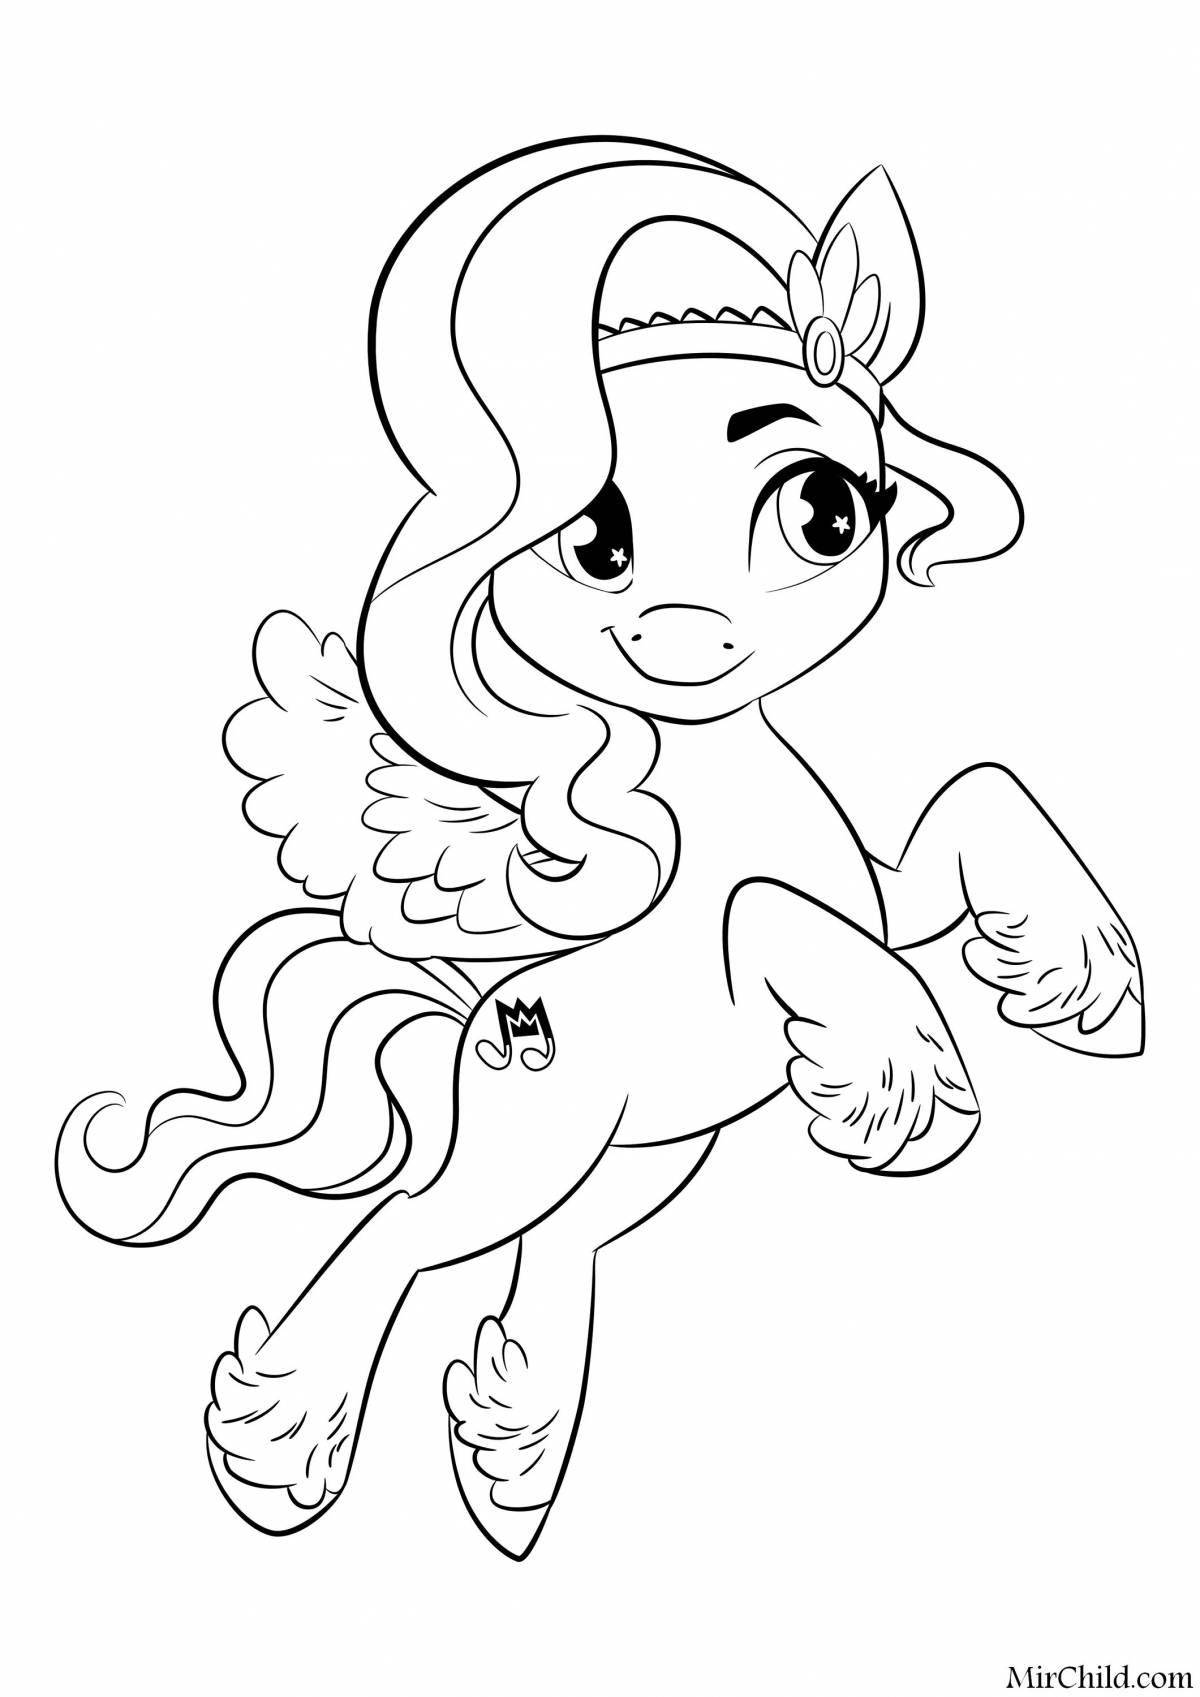 Pony sleigh coloring page filled with game